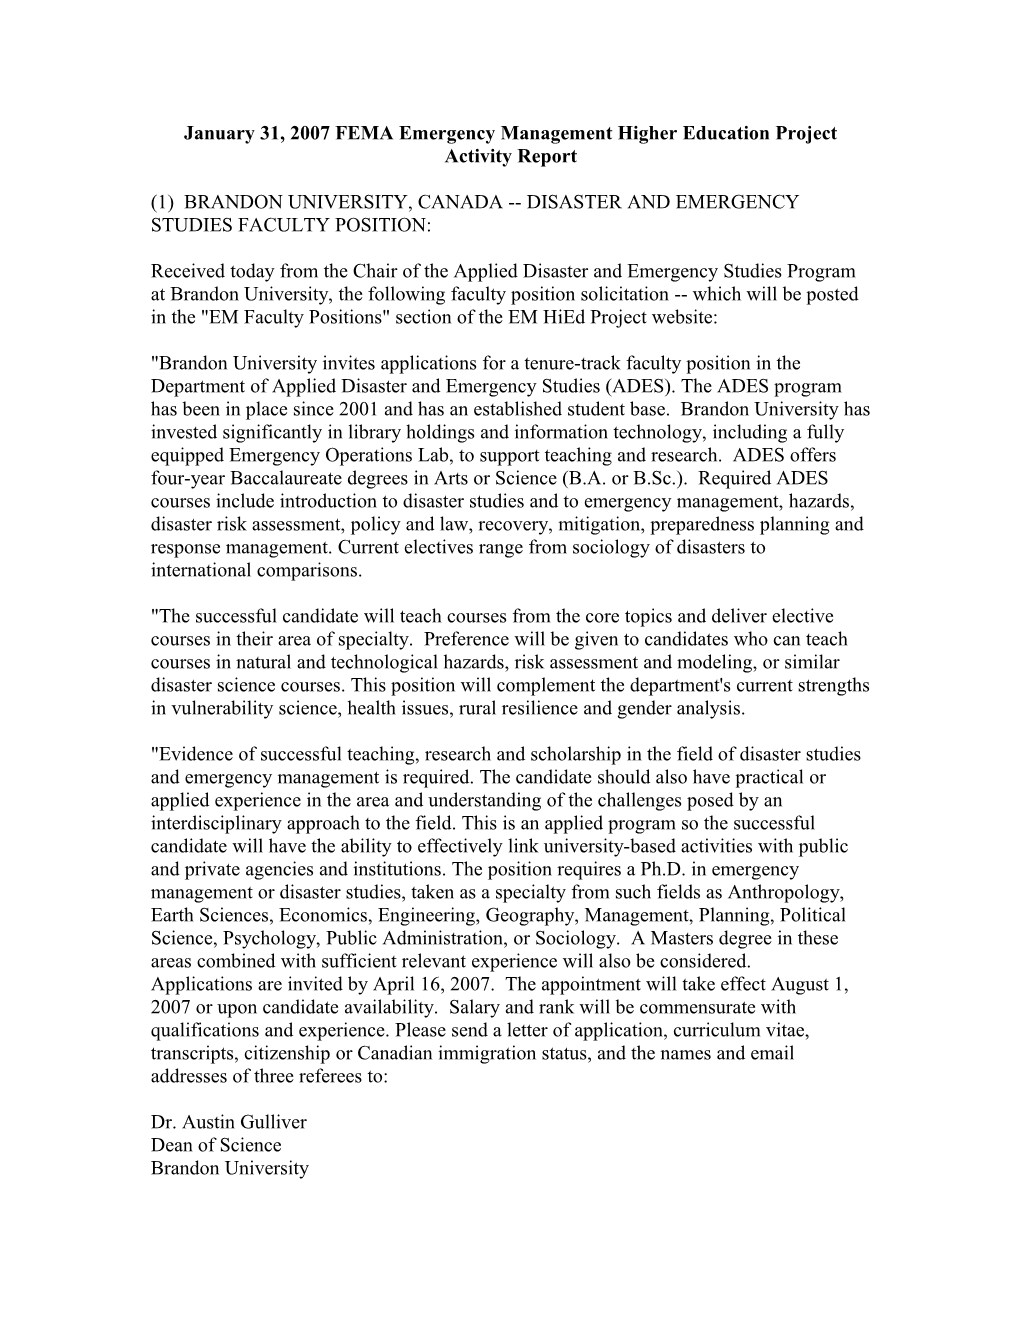 January 31, 2007 FEMA Emergency Management Higher Education Project Activity Report